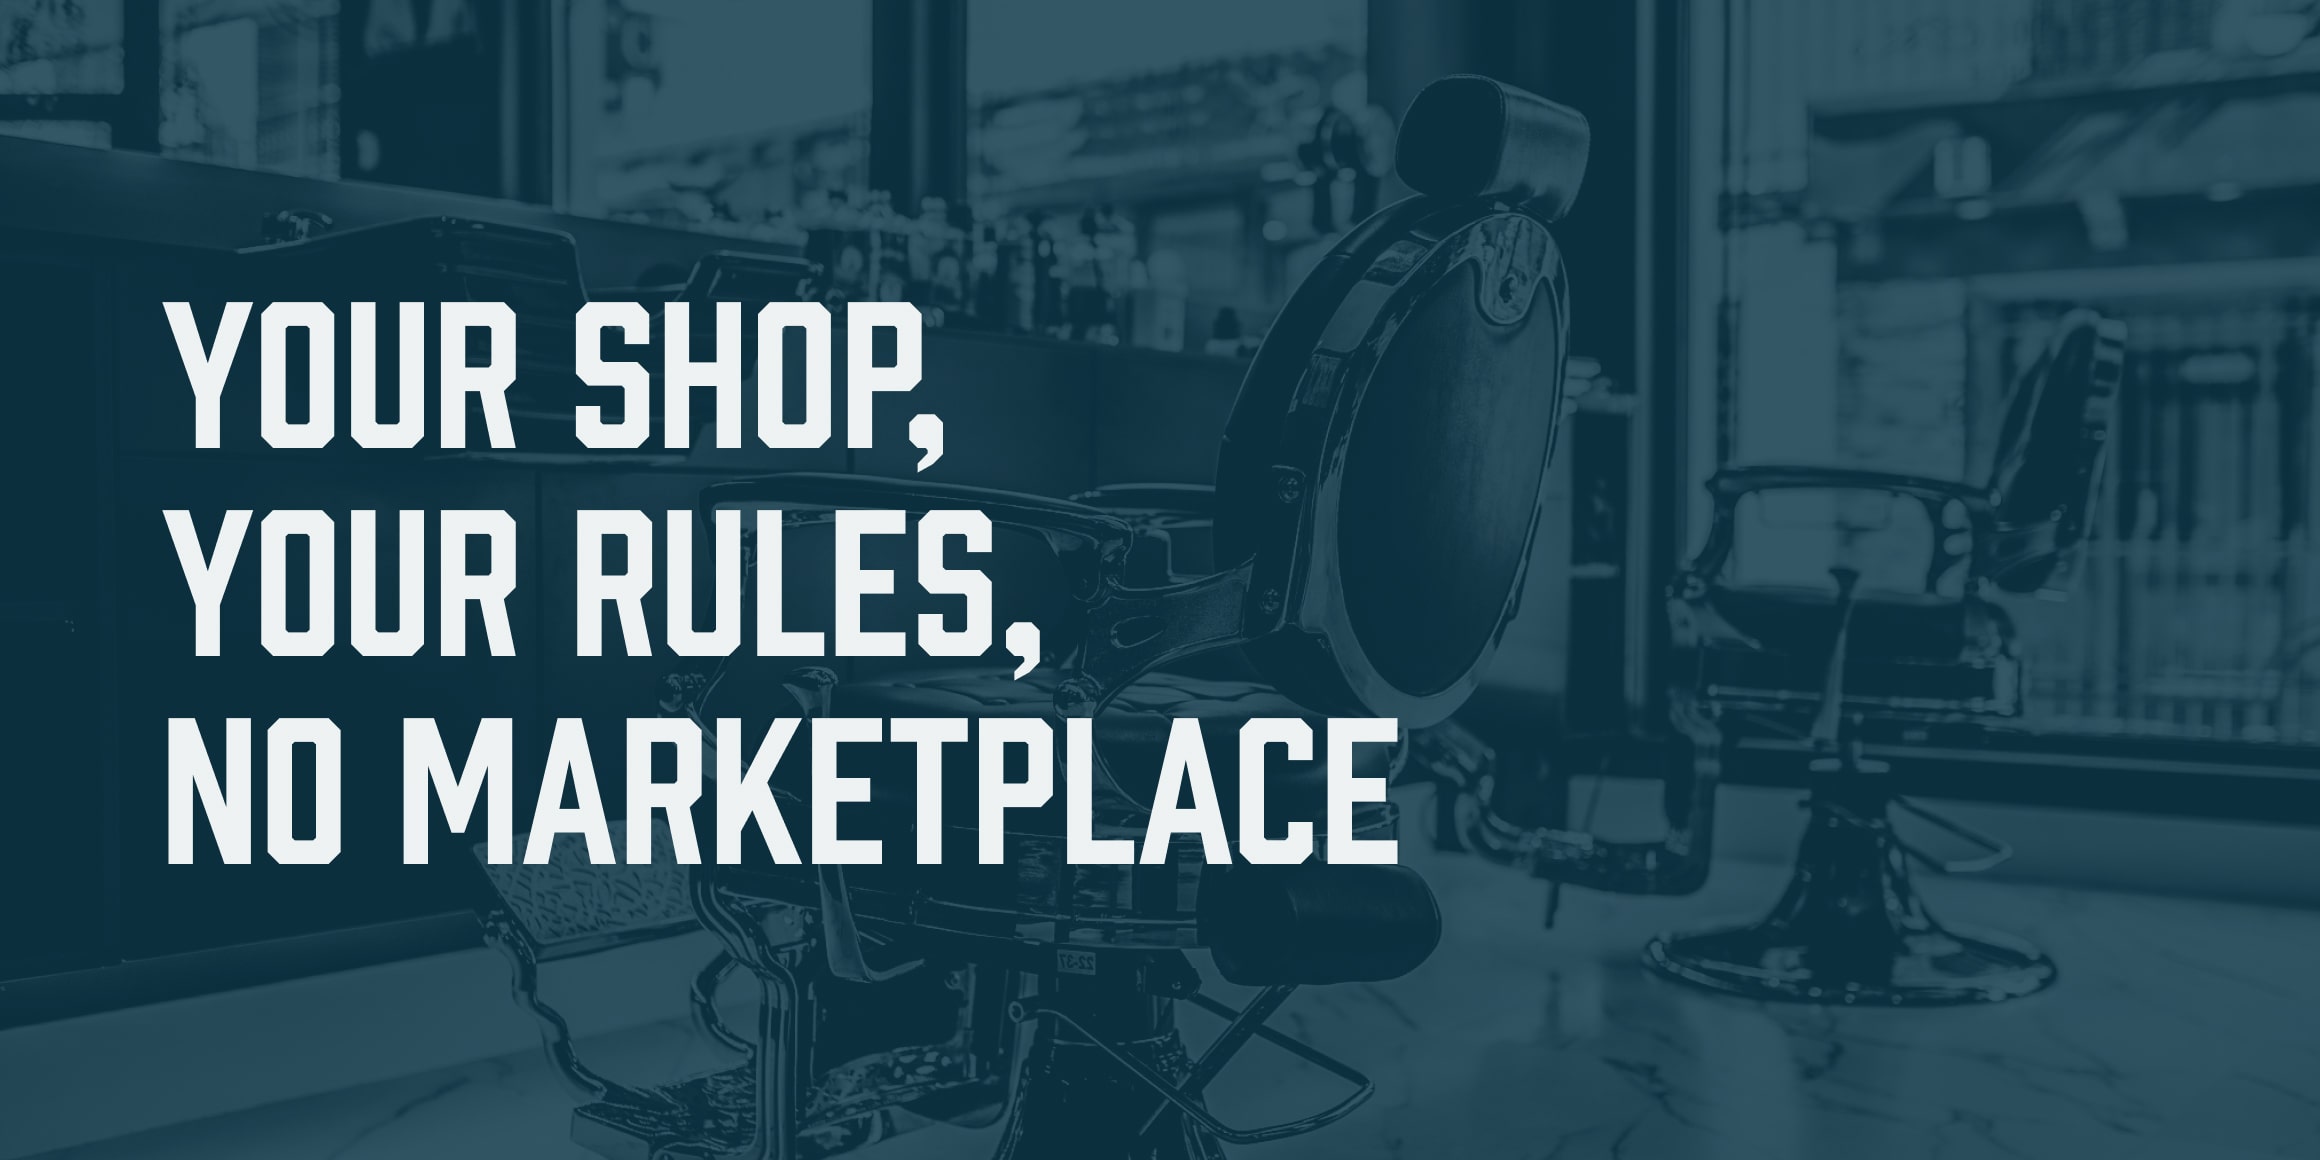 INCH: Your Shop, Your Rules, No Marketplace.